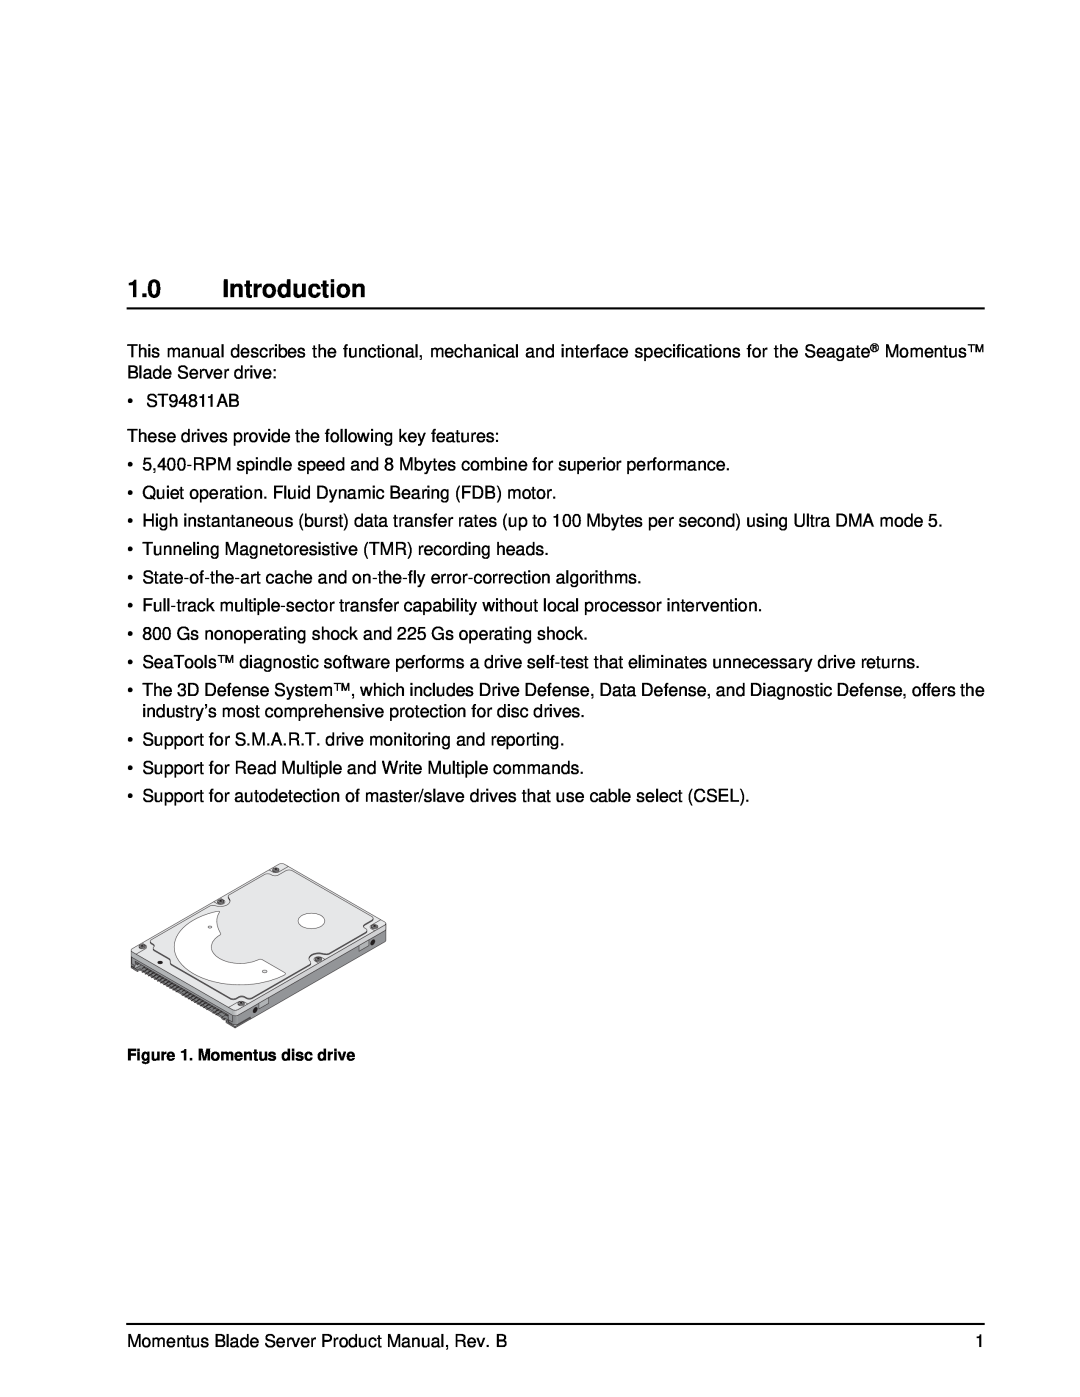 Seagate ST94811AB manual Introduction, Momentus disc drive 